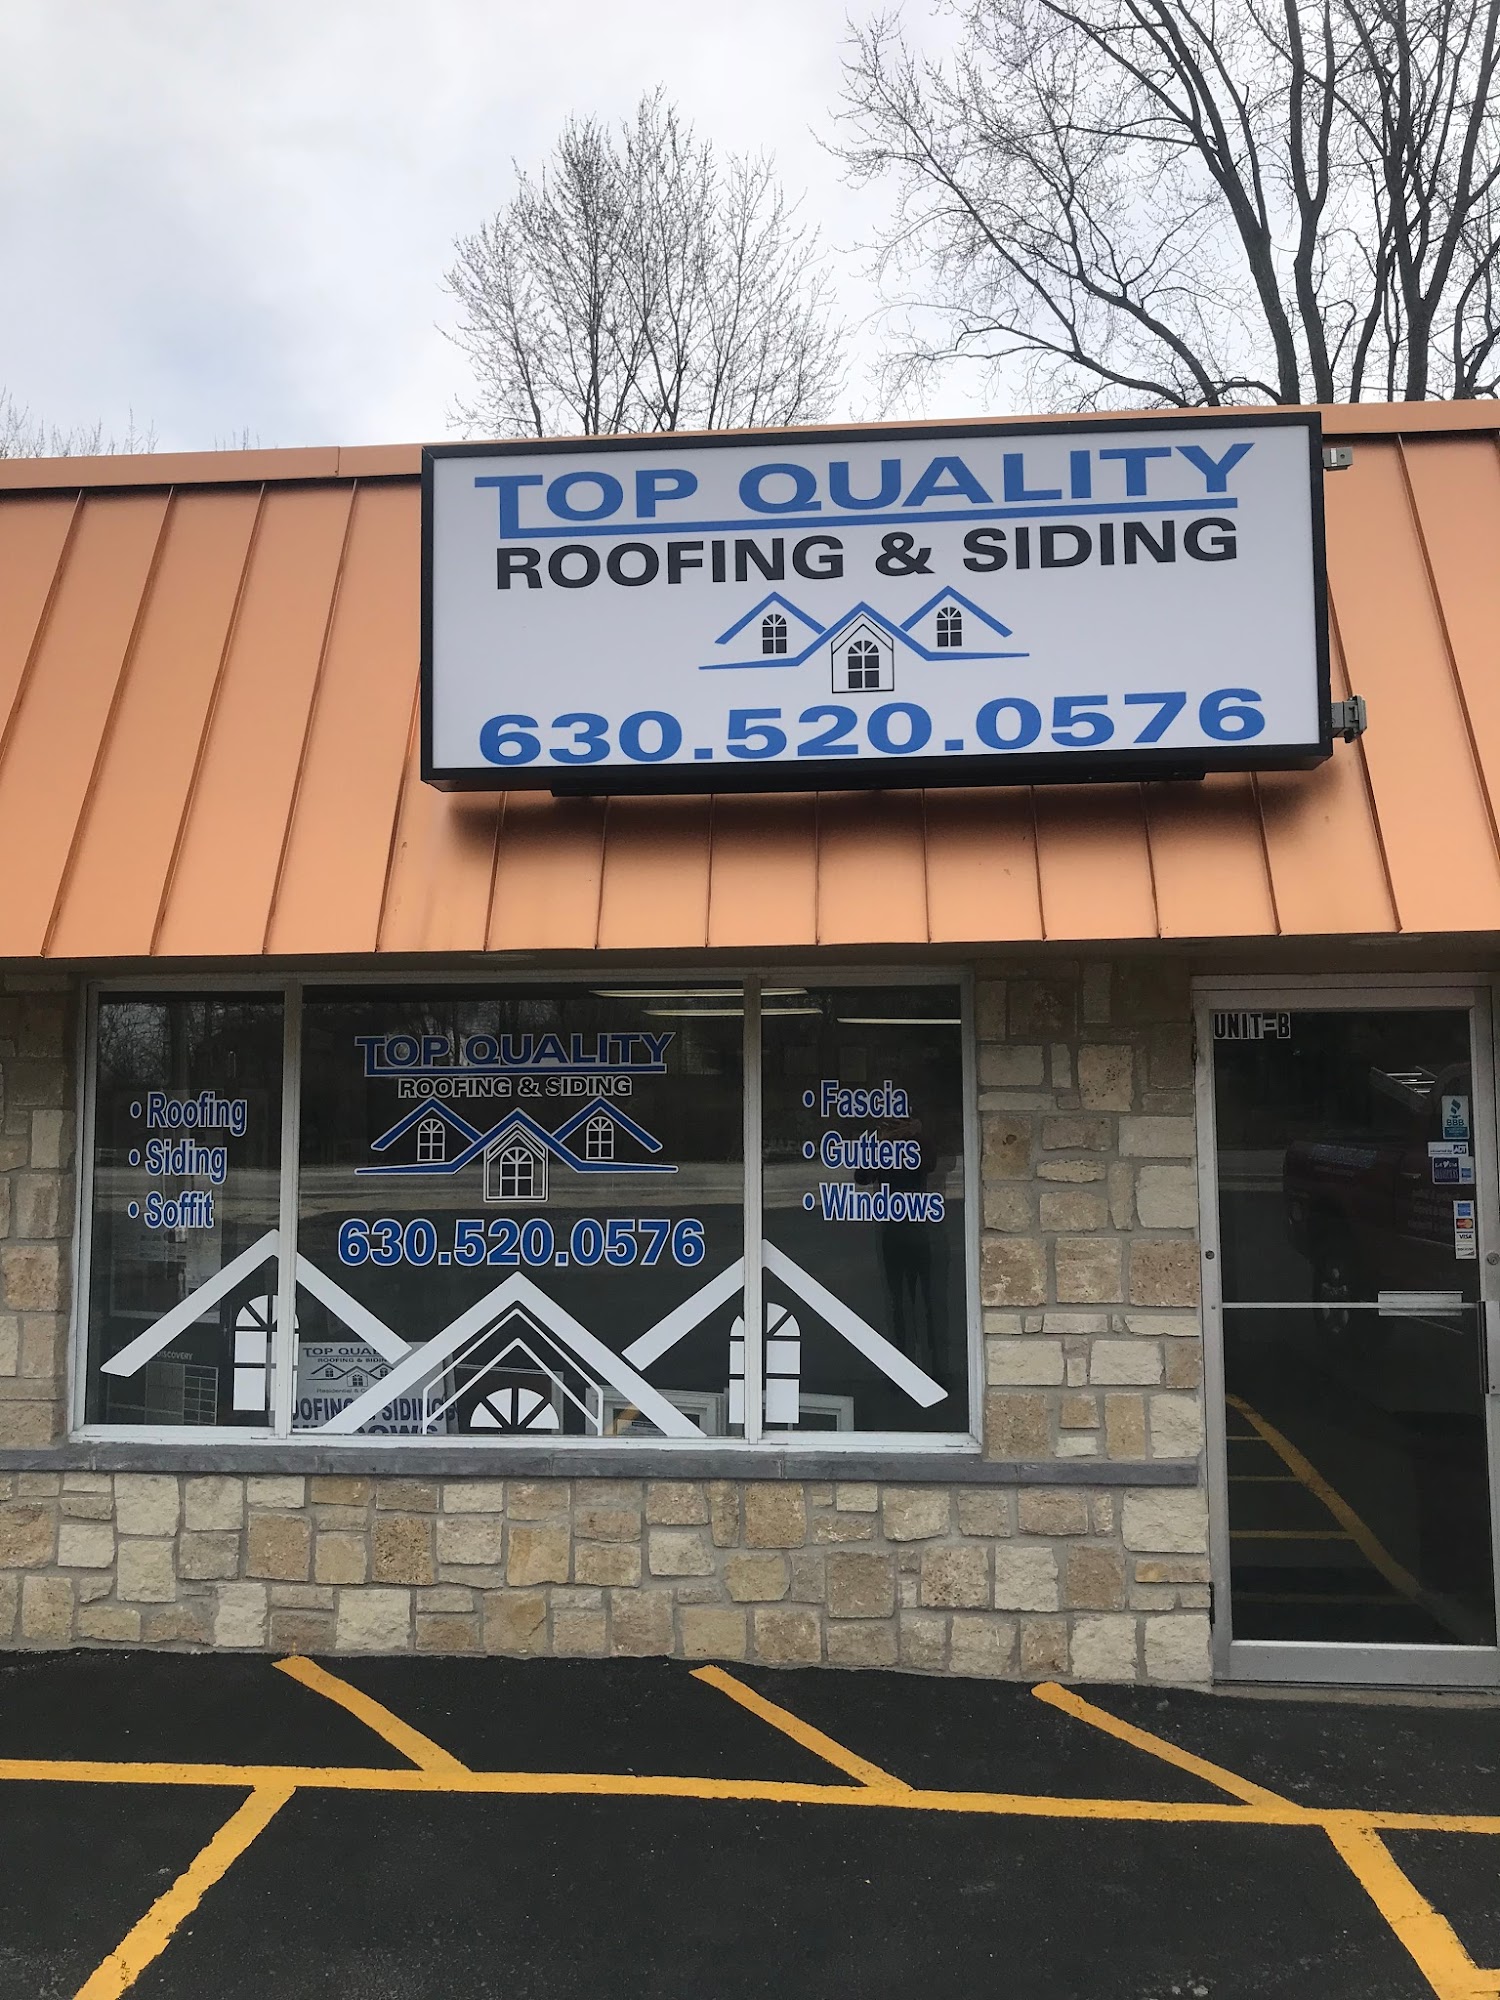 Top Quality Roofing & Siding